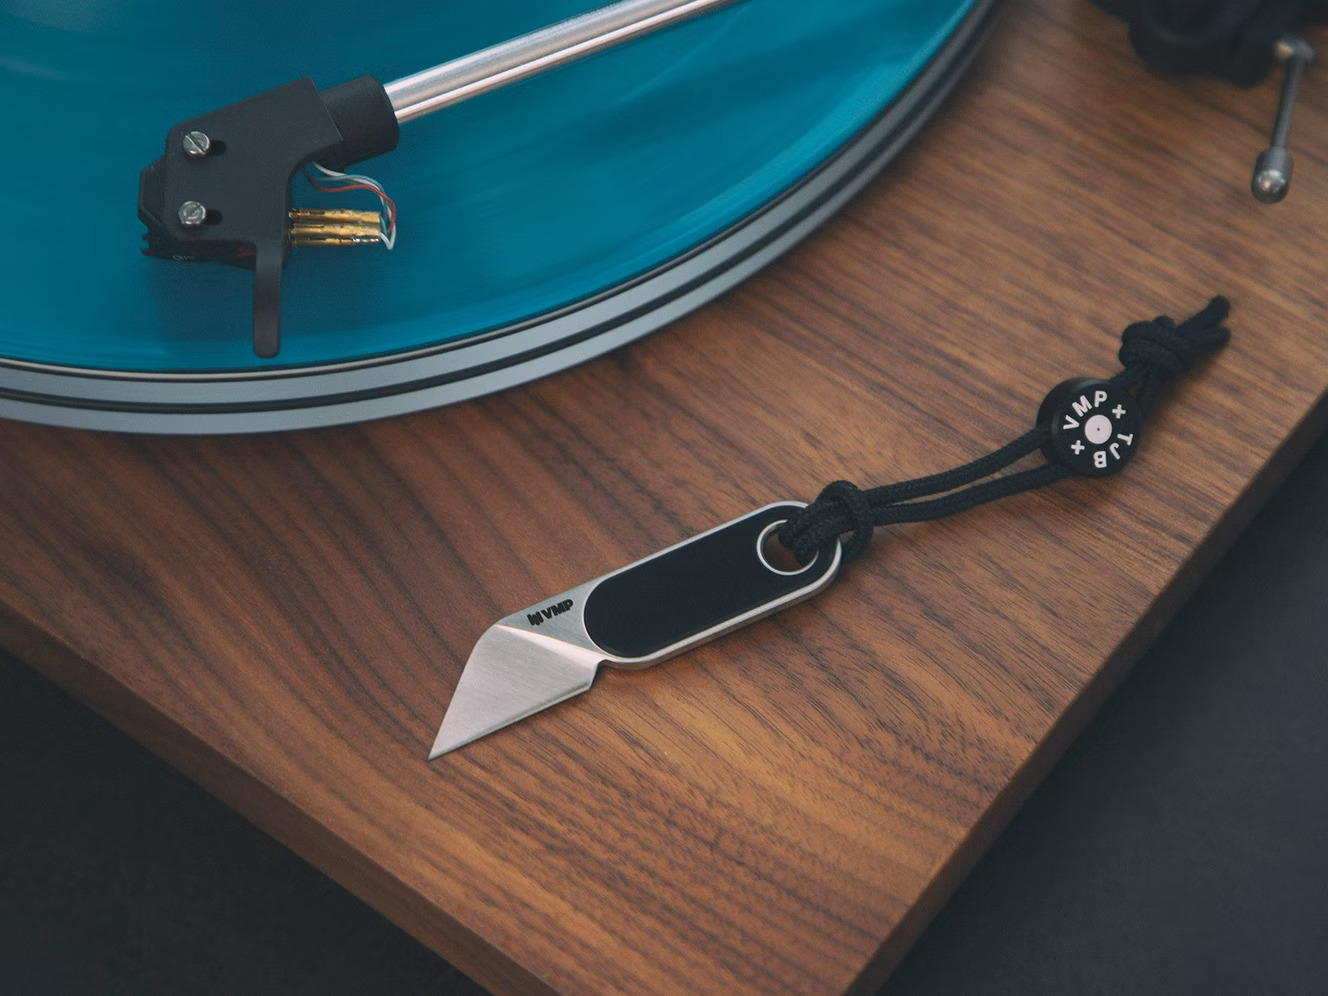 James Brand’s New Fixed Blade is for Opening Vinyl Records